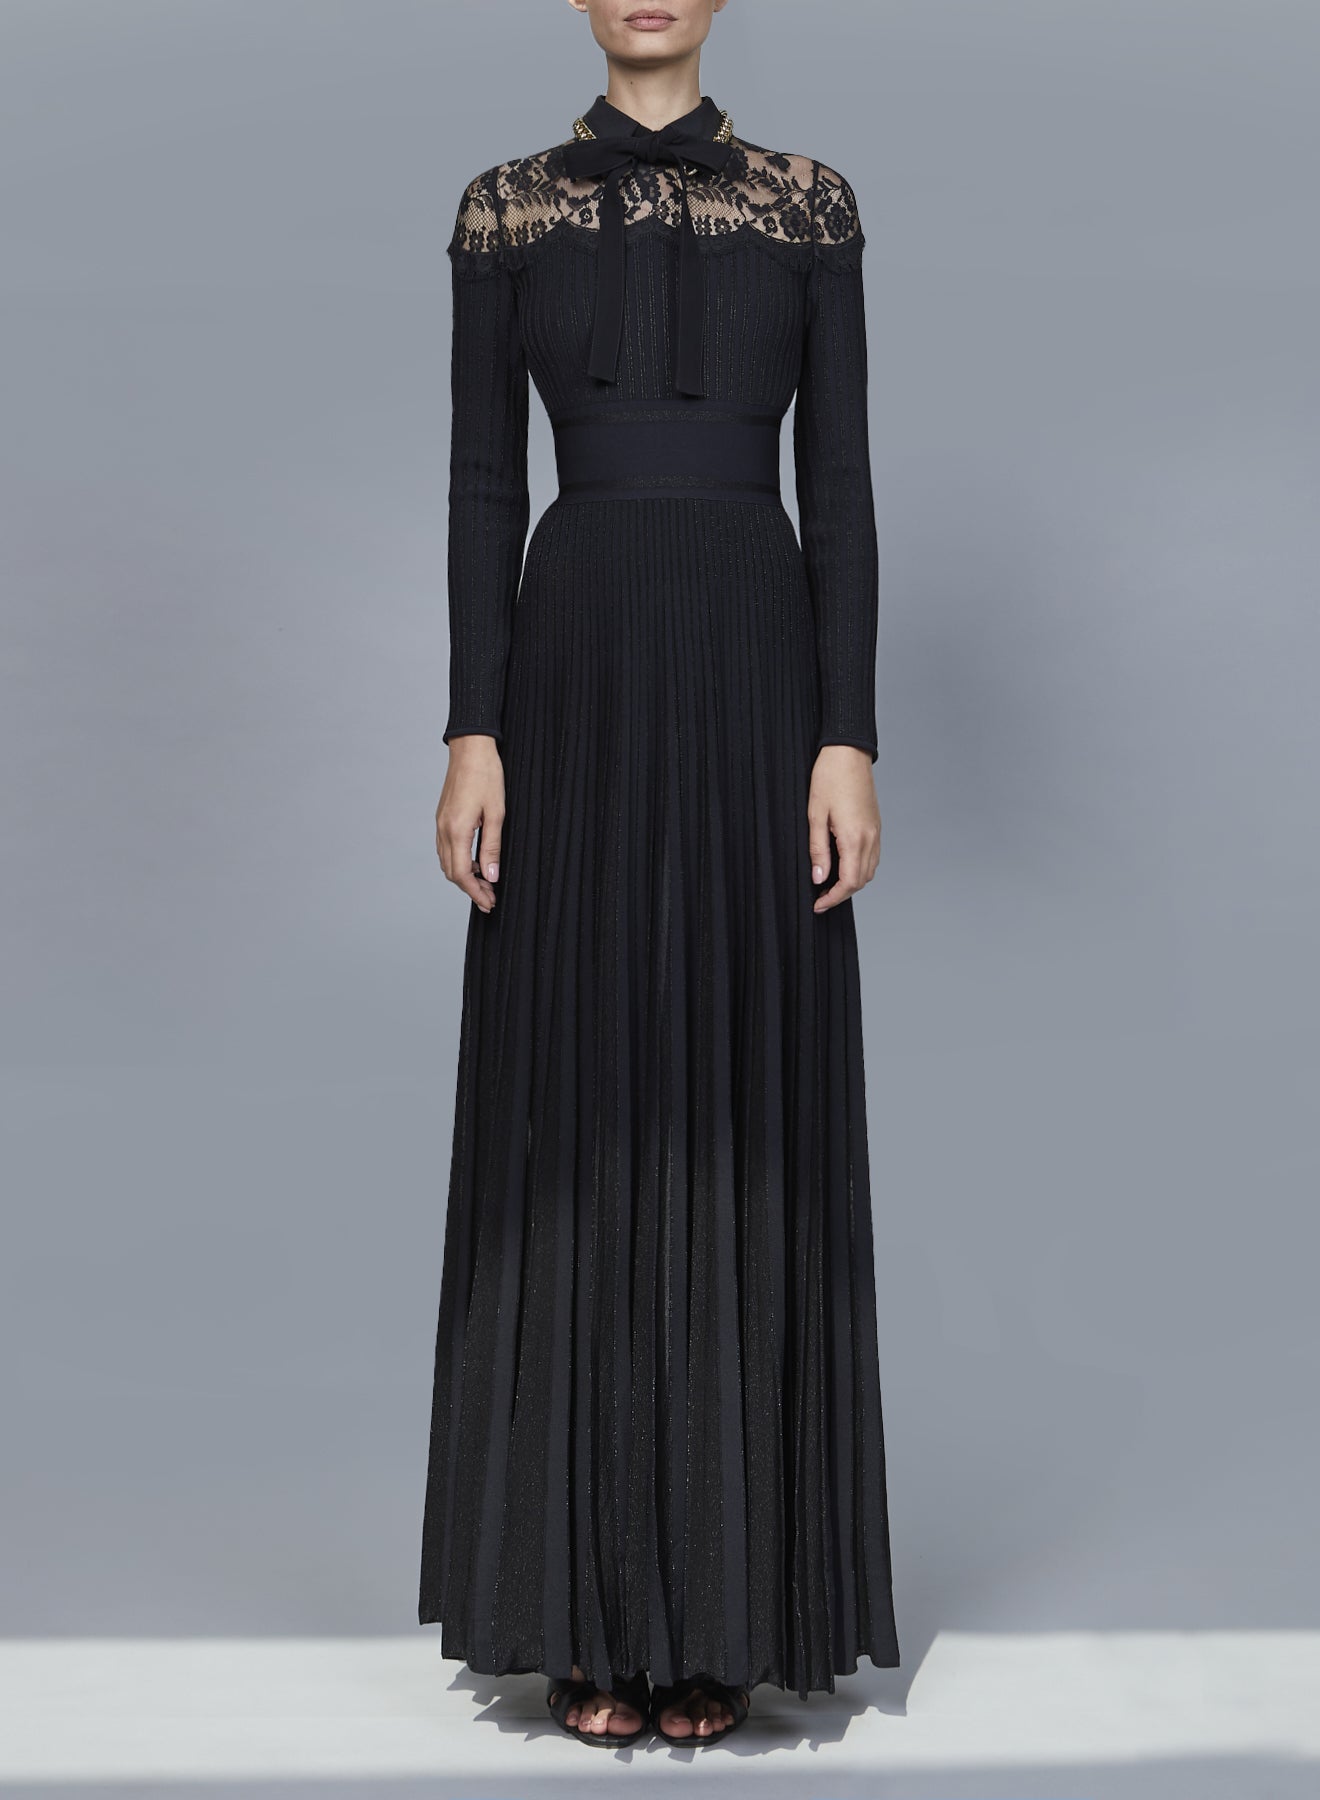 Knit and Lace Dress – ELIE SAAB